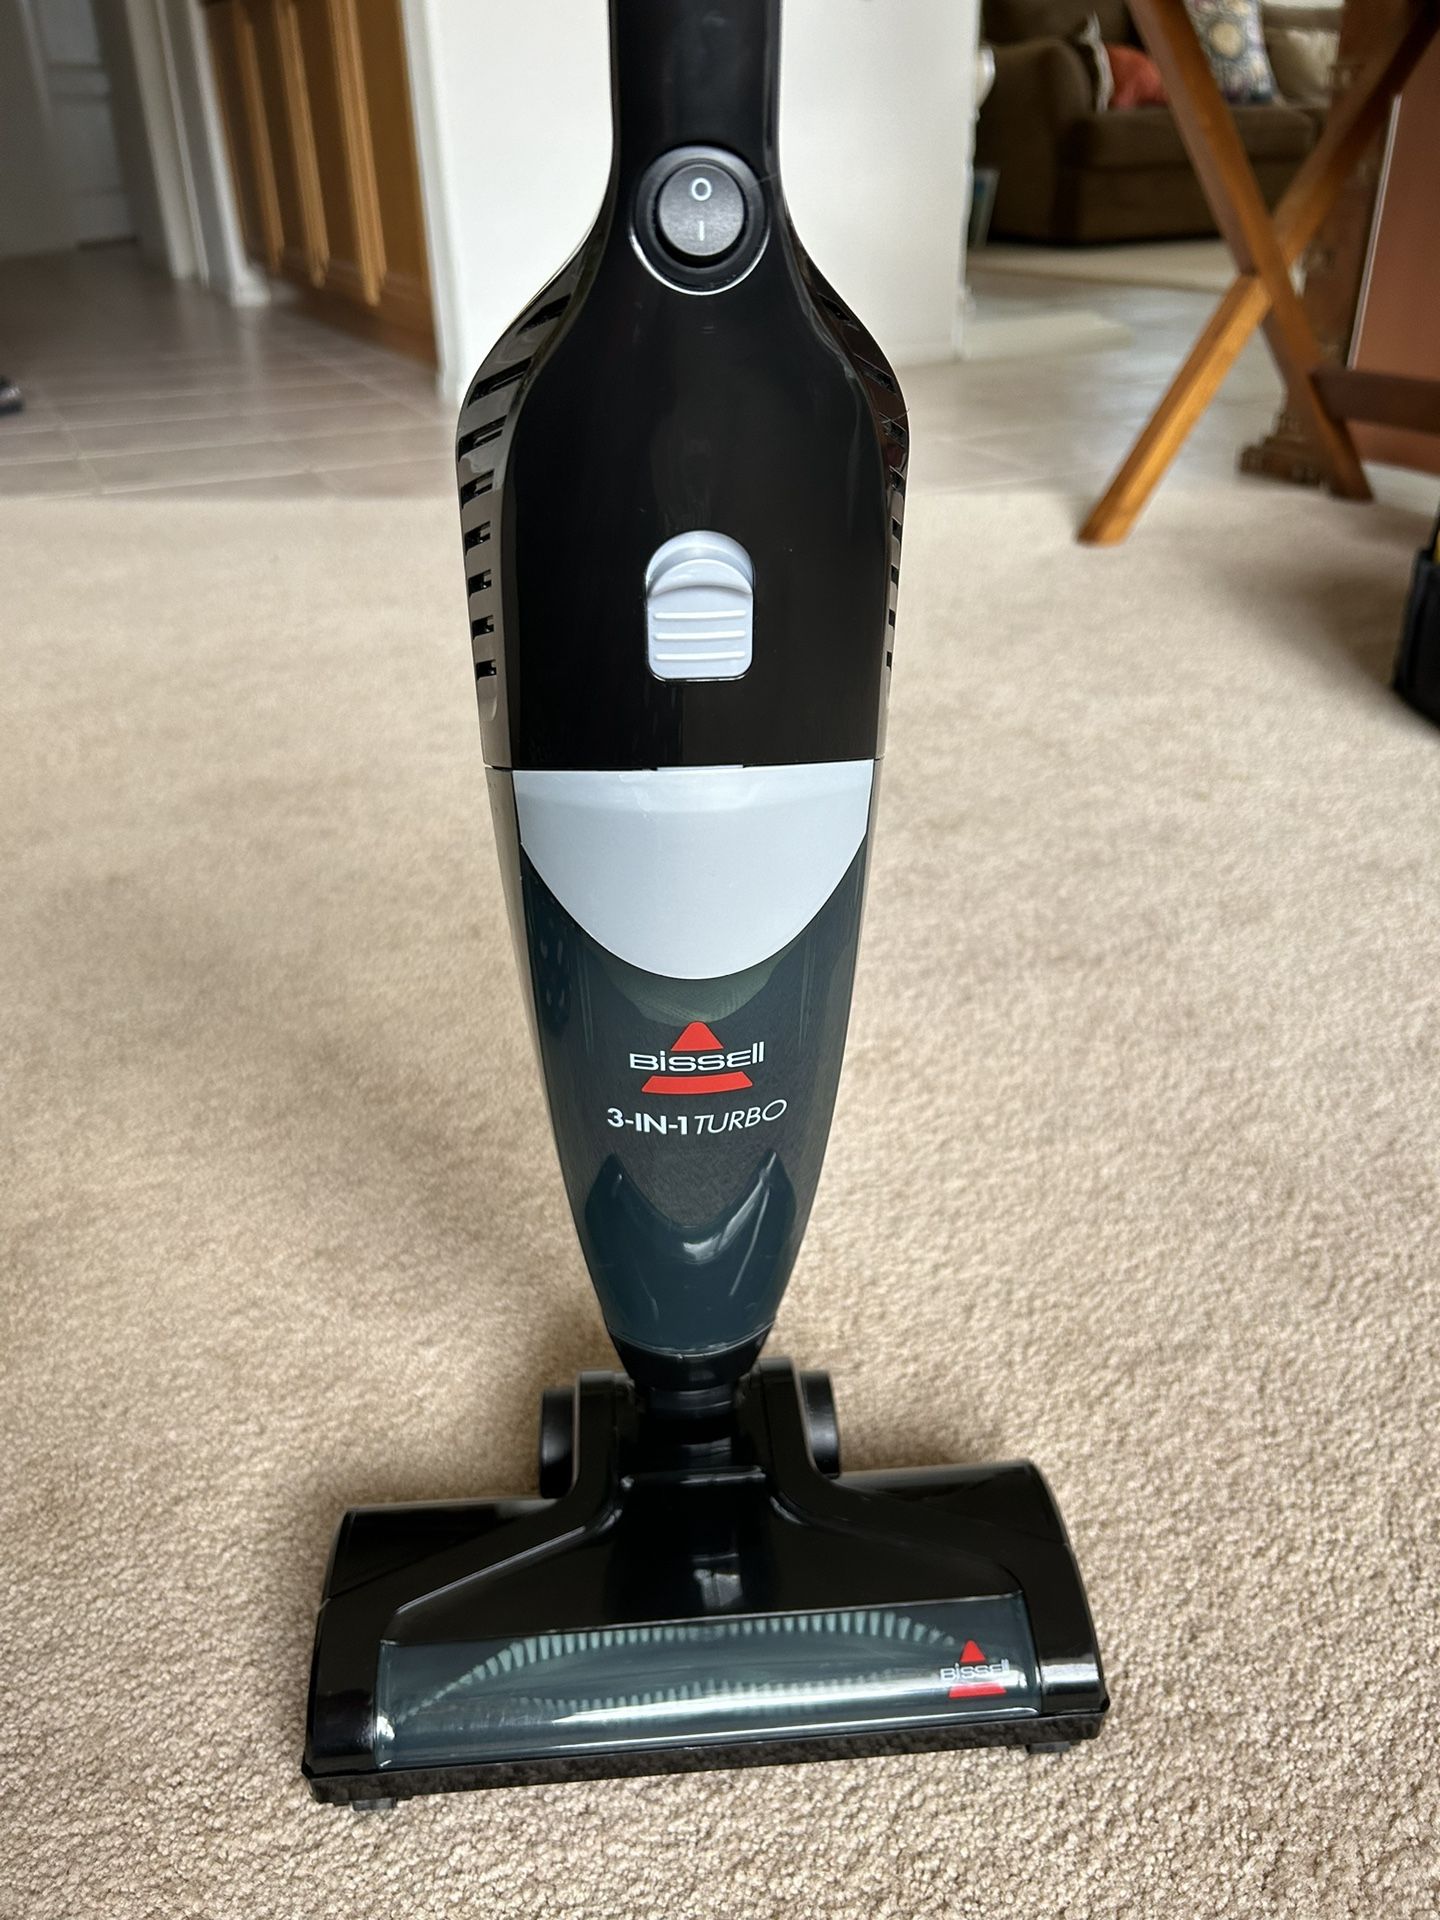 Bissell 3-in-1 Turbo Vacuum Cleaner.